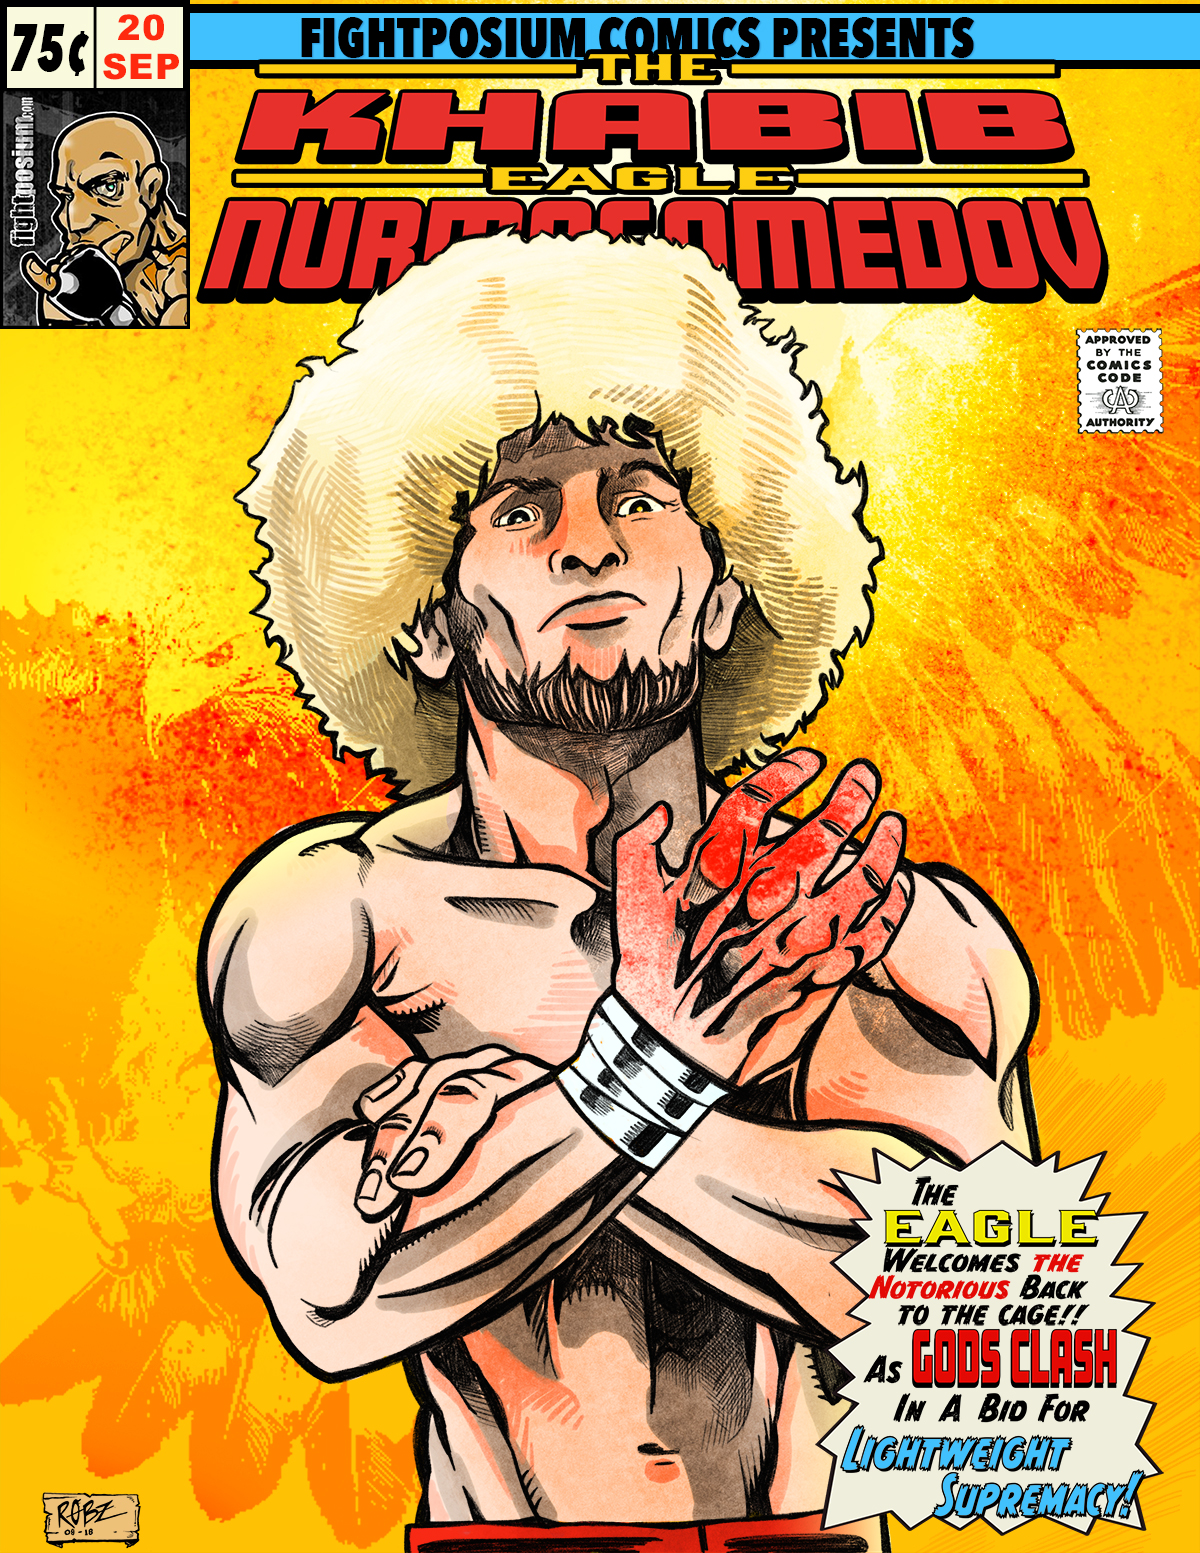 You are currently viewing Khabib “The Eagle” Nurmagomedov – The Eagle Welcomes The Notorious Back to the Cage!